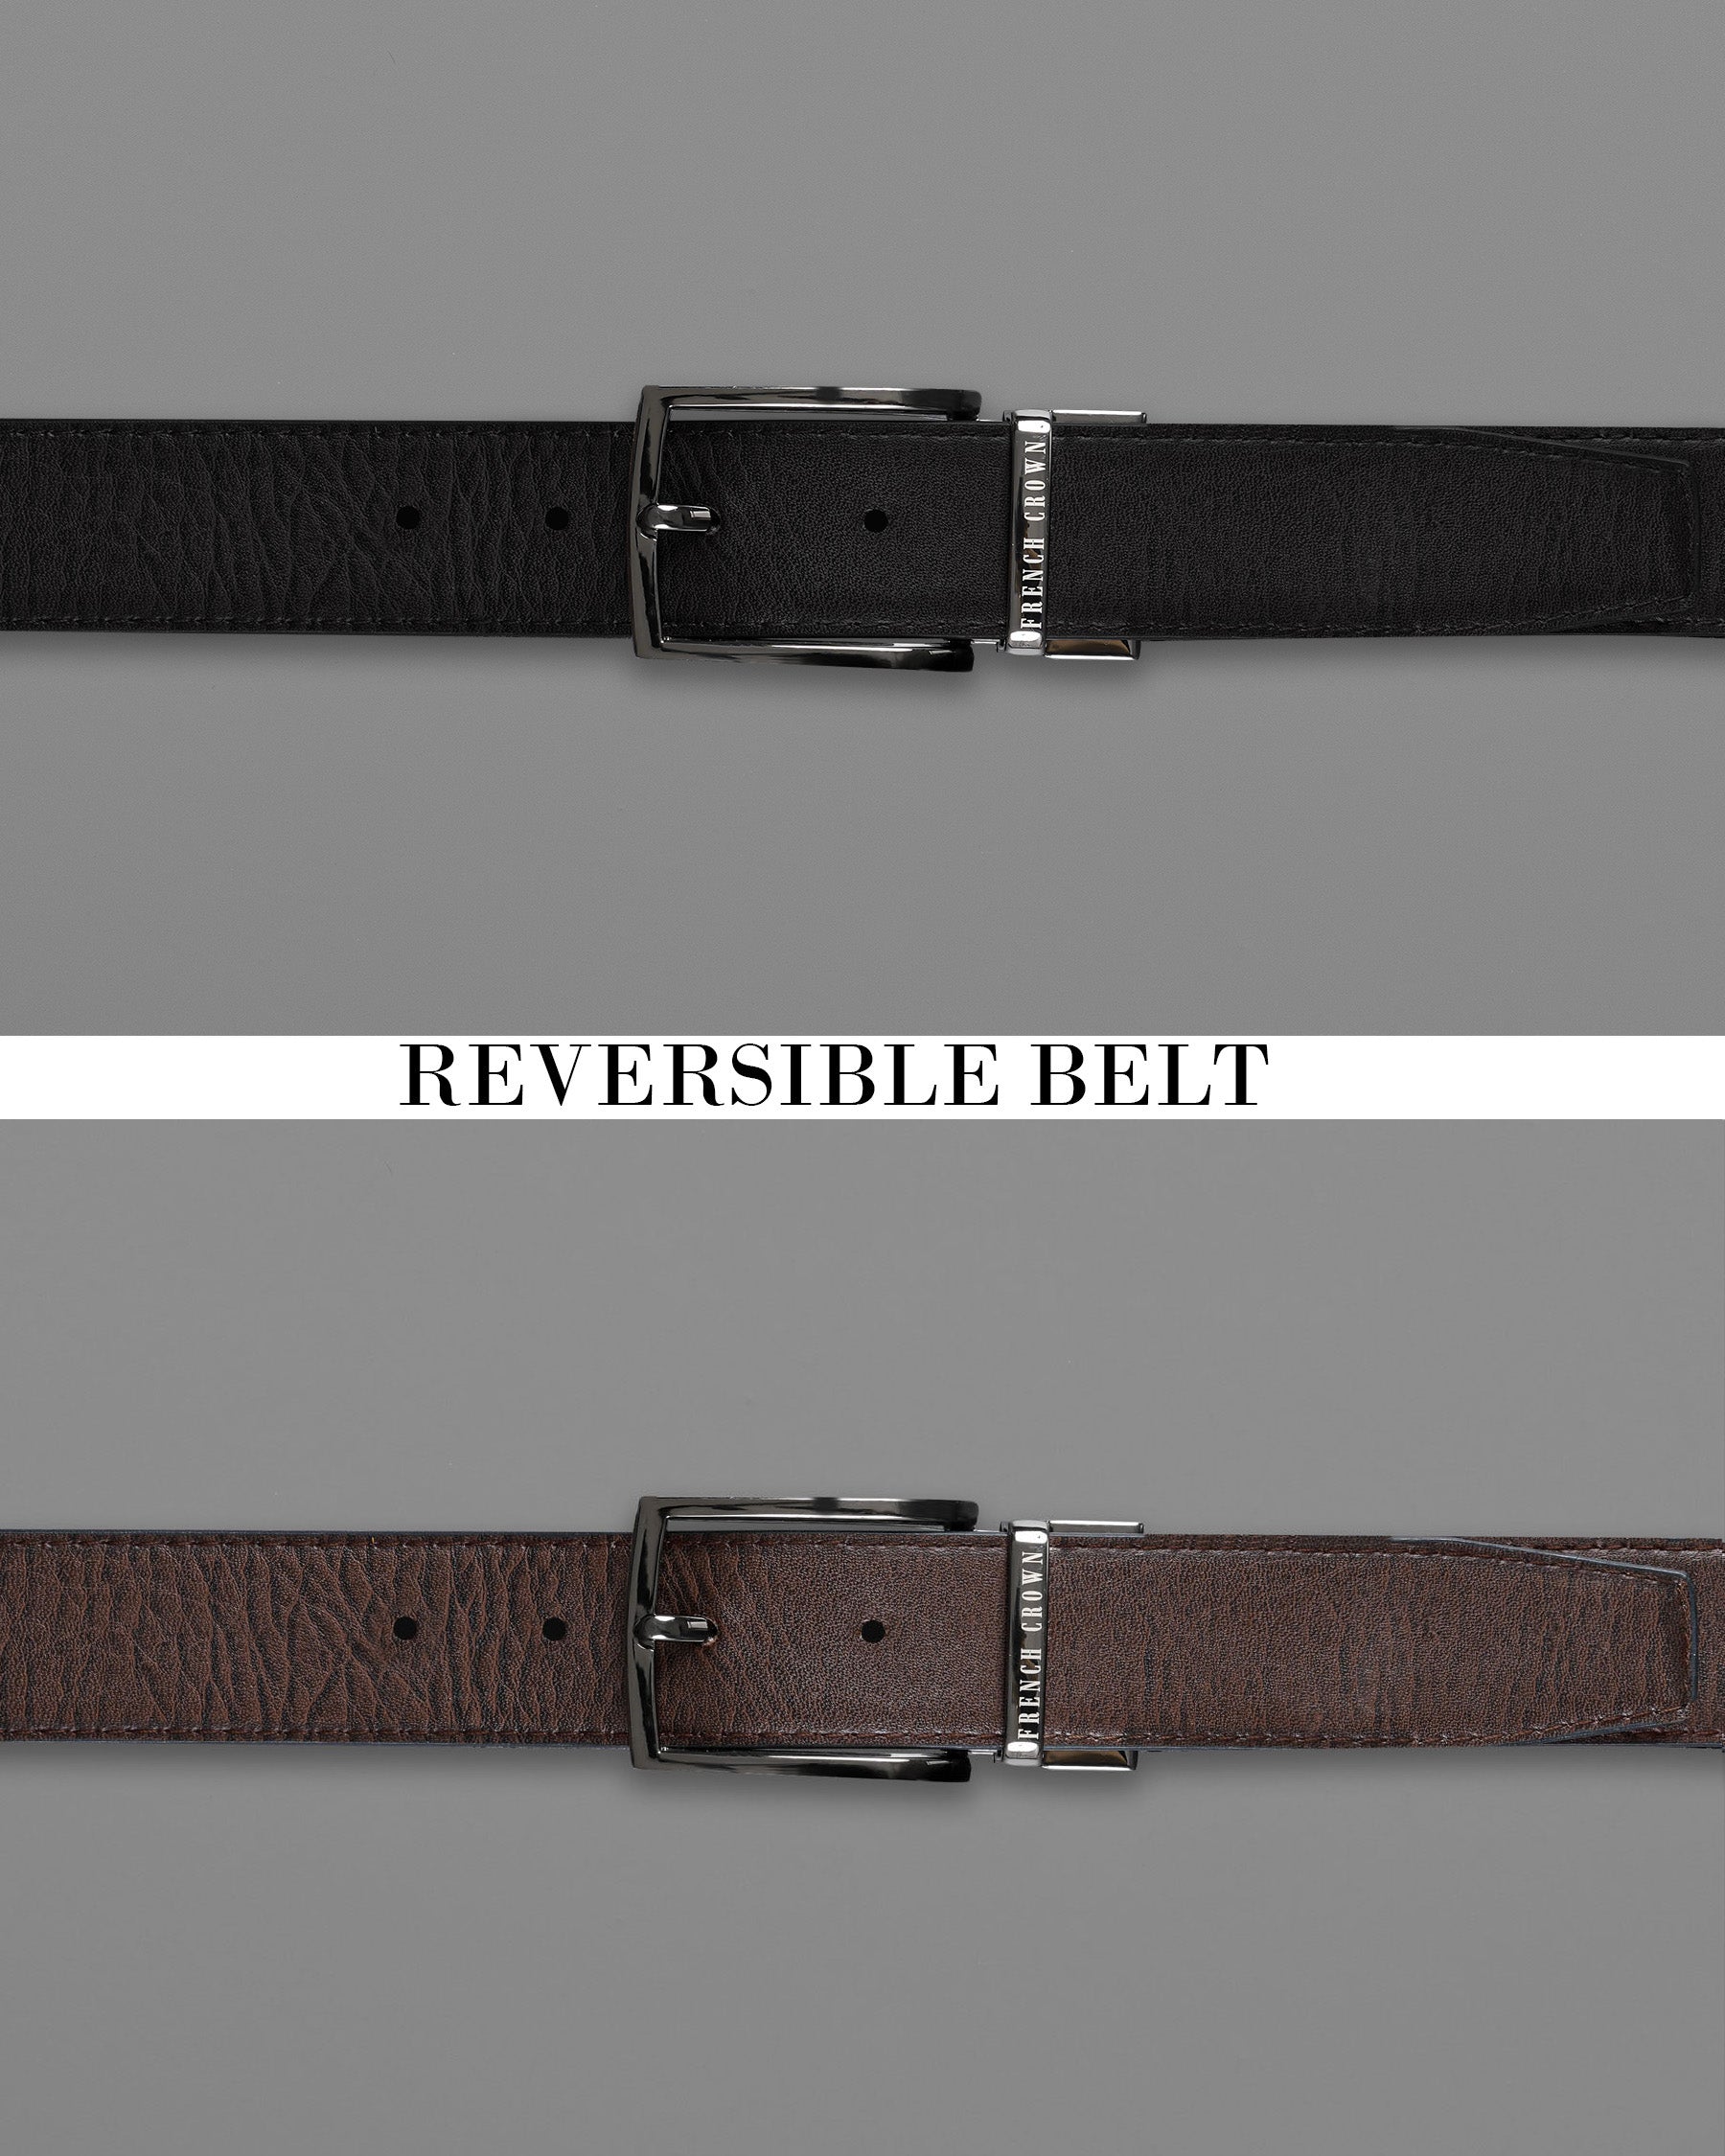 Silver Shiny Buckle with Jade Black and Brown Leather Free Handcrafted Reversible Belt BT086-28, BT086-30, BT086-32, BT086-34, BT086-36, BT086-38